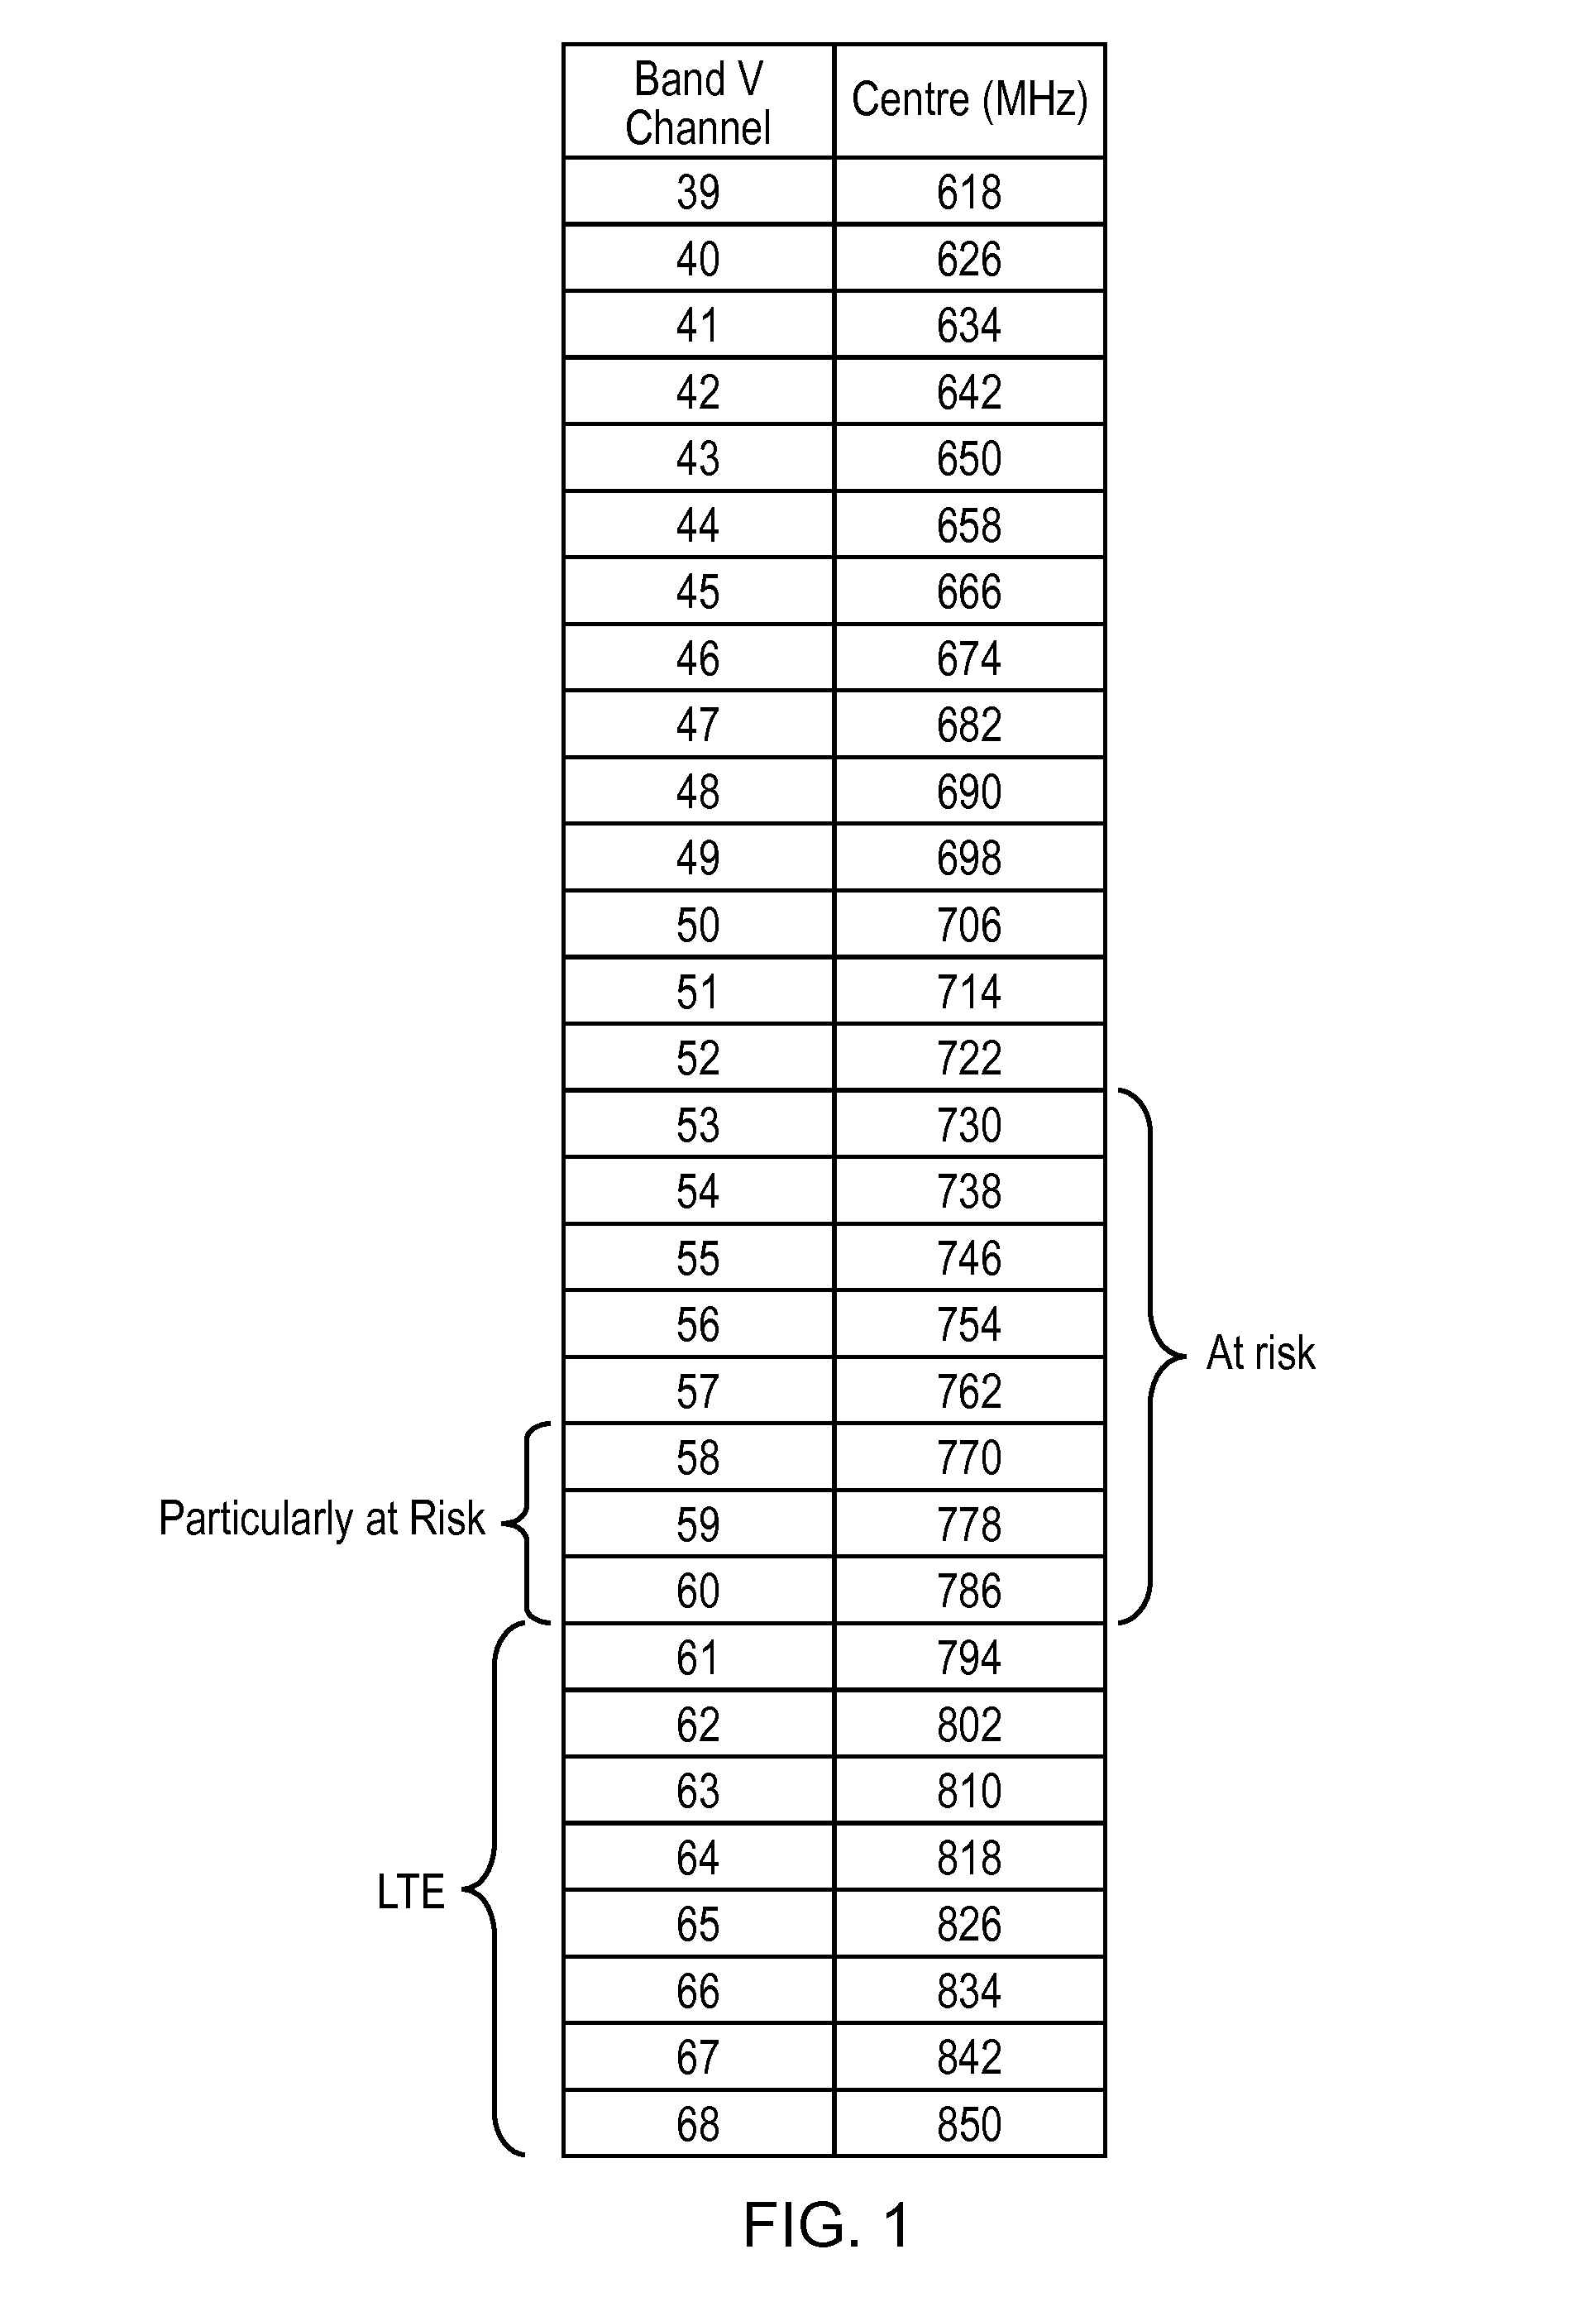 LTE frequency channel avoidance